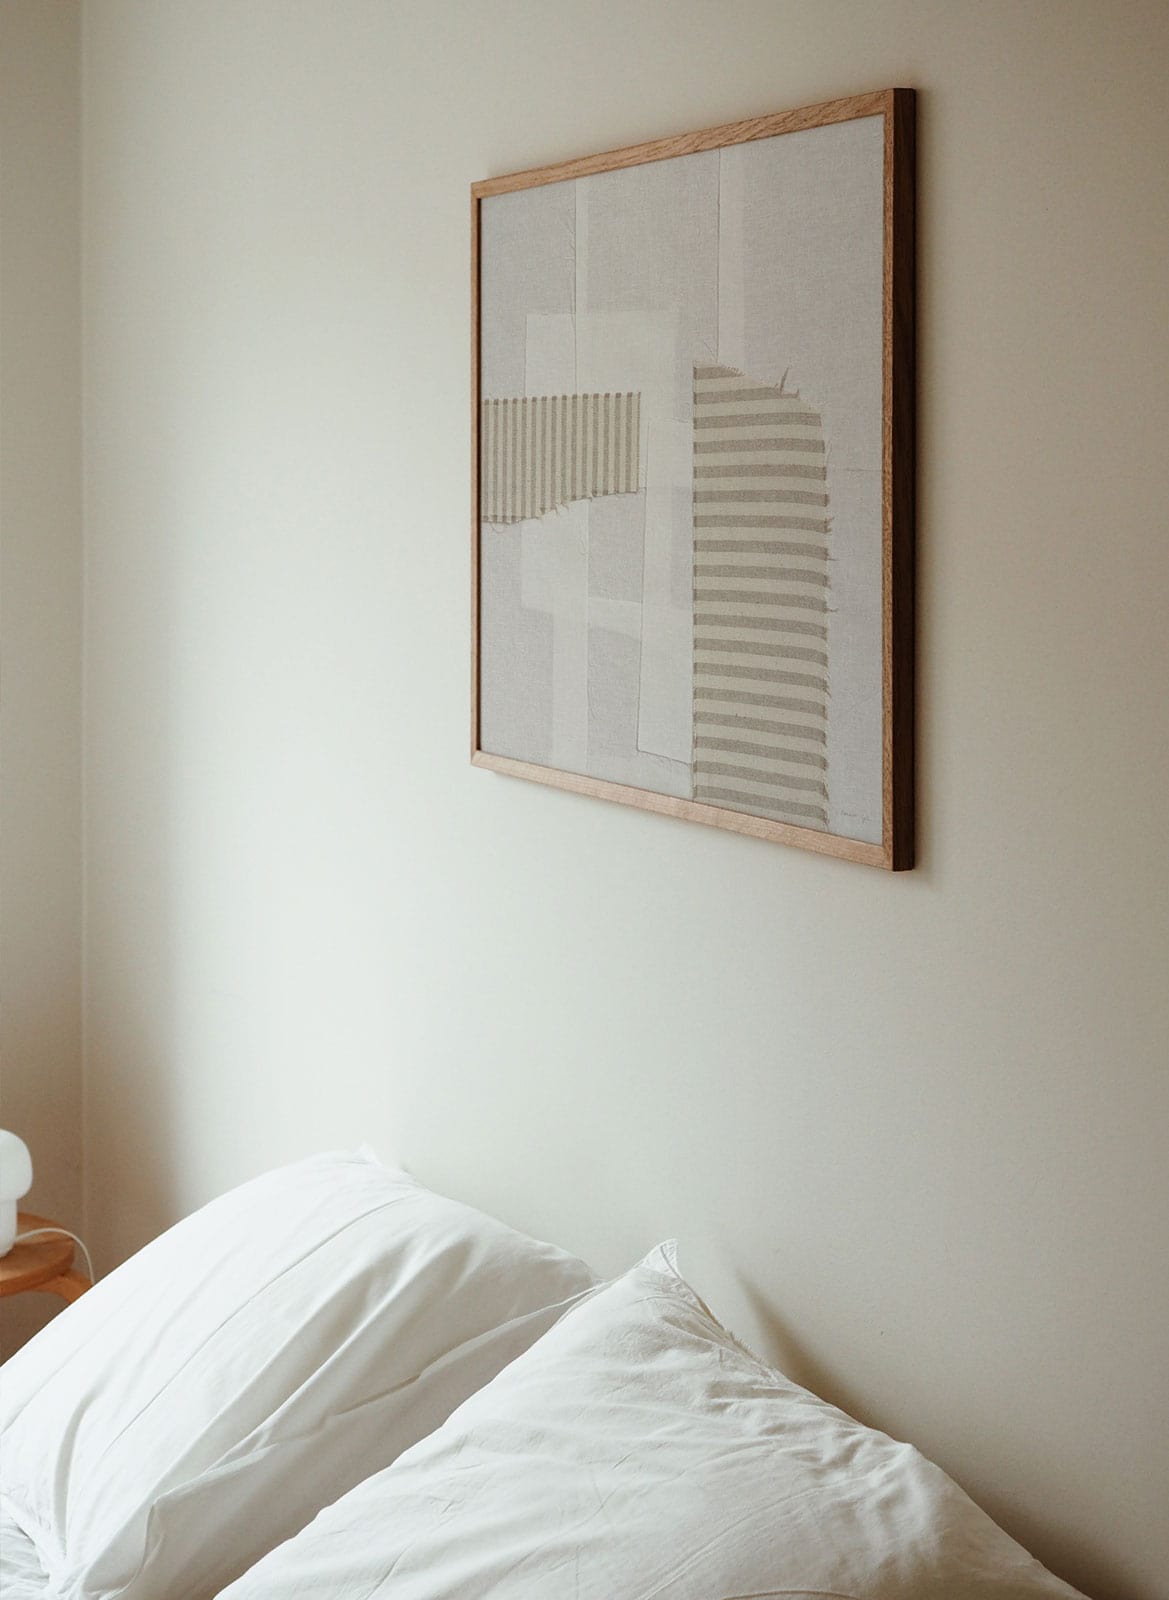 Framed black and white poster hanging in bedroom by Atelier Cph